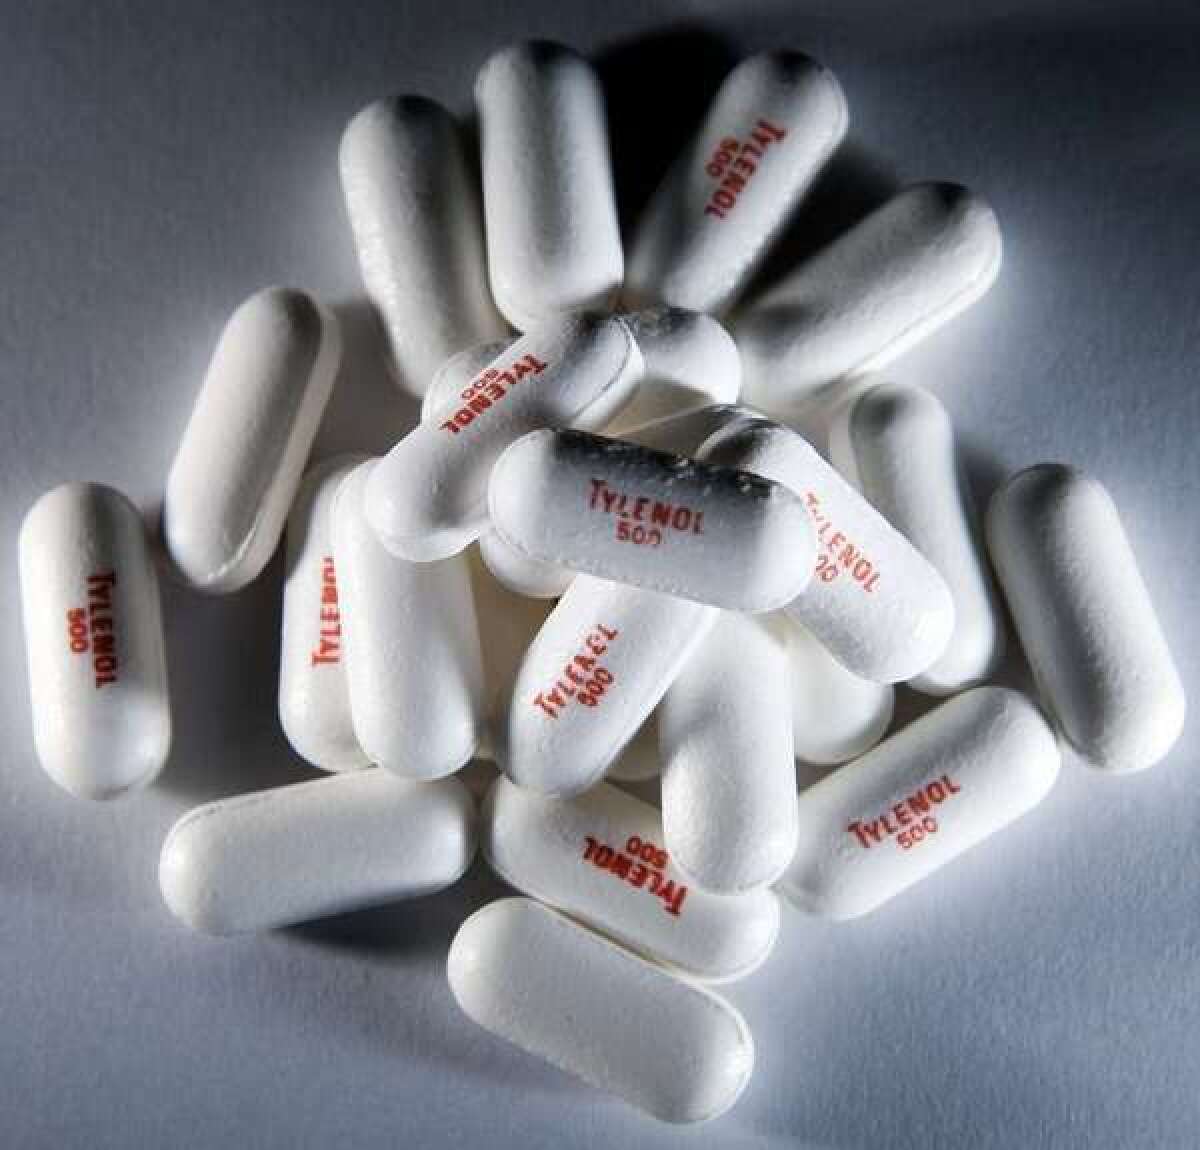 Researchers have found that extra-strength Tylenol may be able to mitigate the pain associated with an existential crisis.